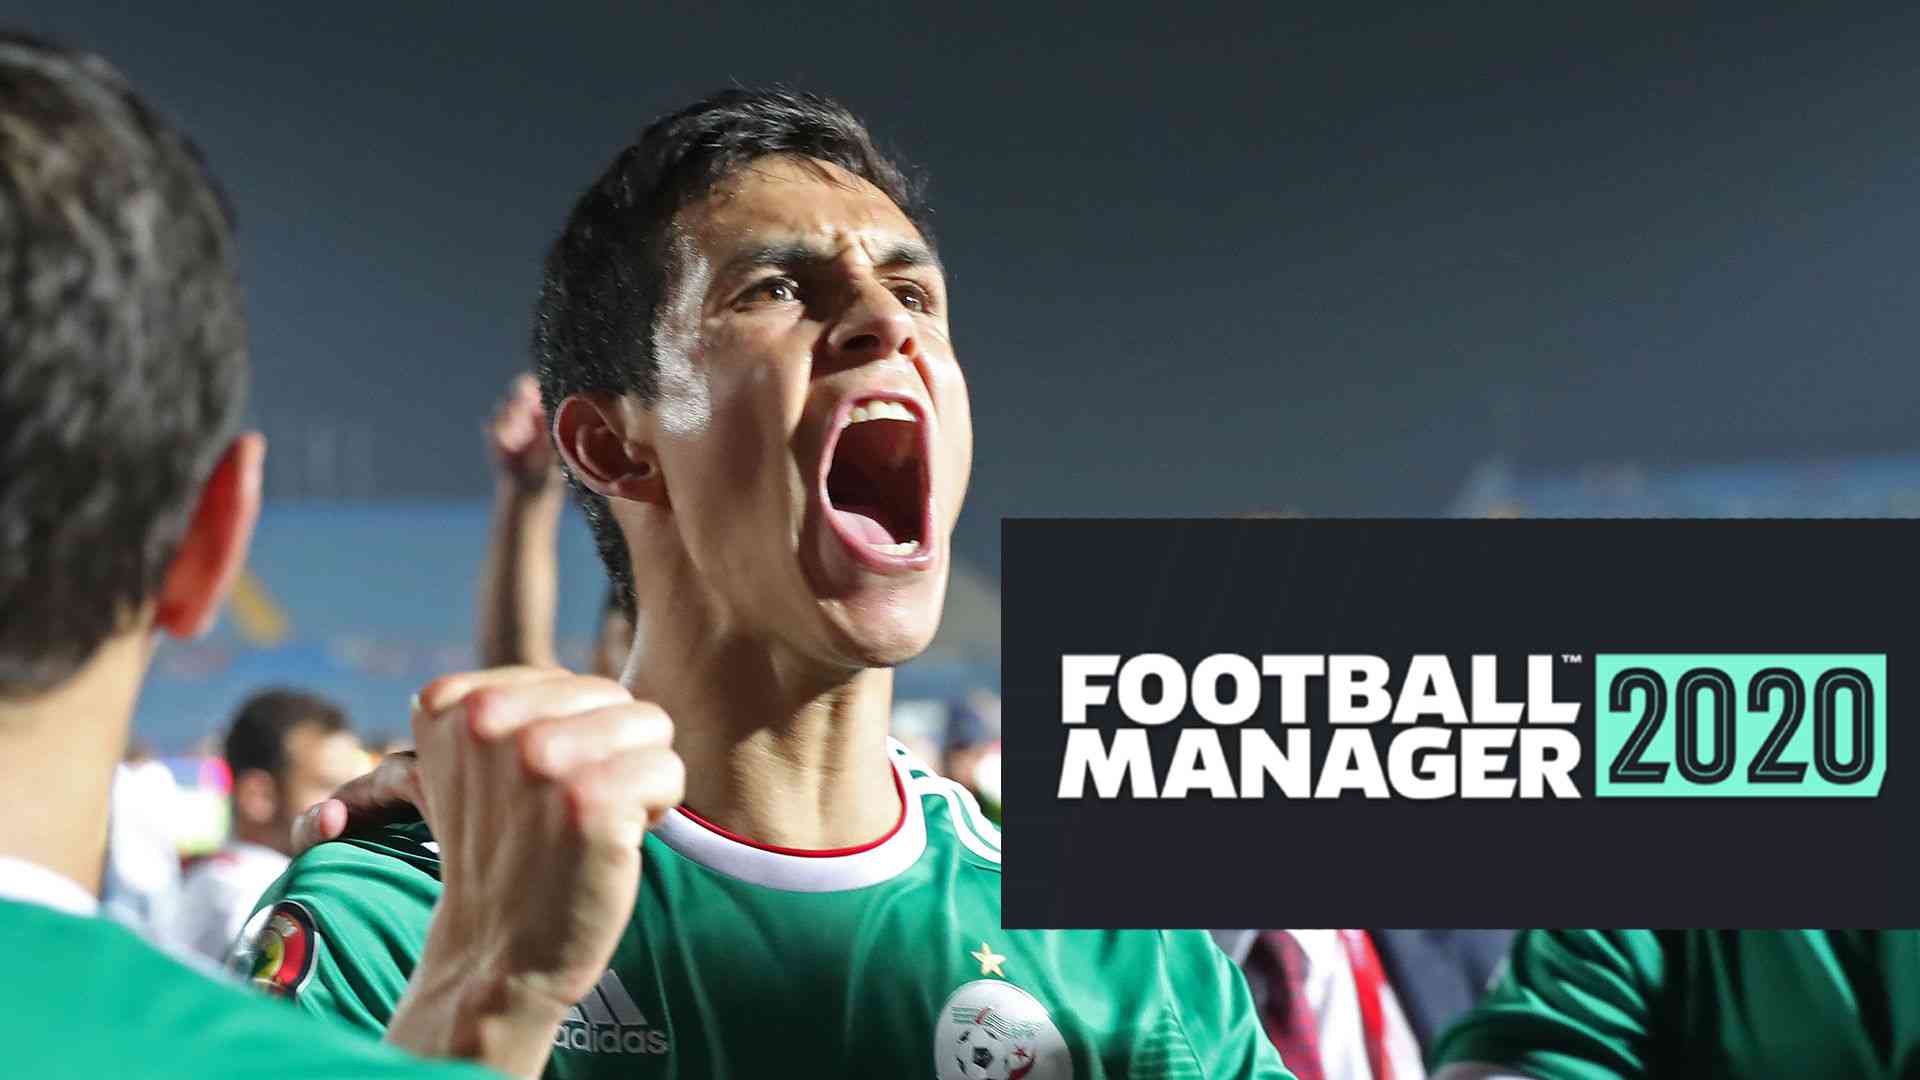 football manager 2020 release date announced 3389 big 1